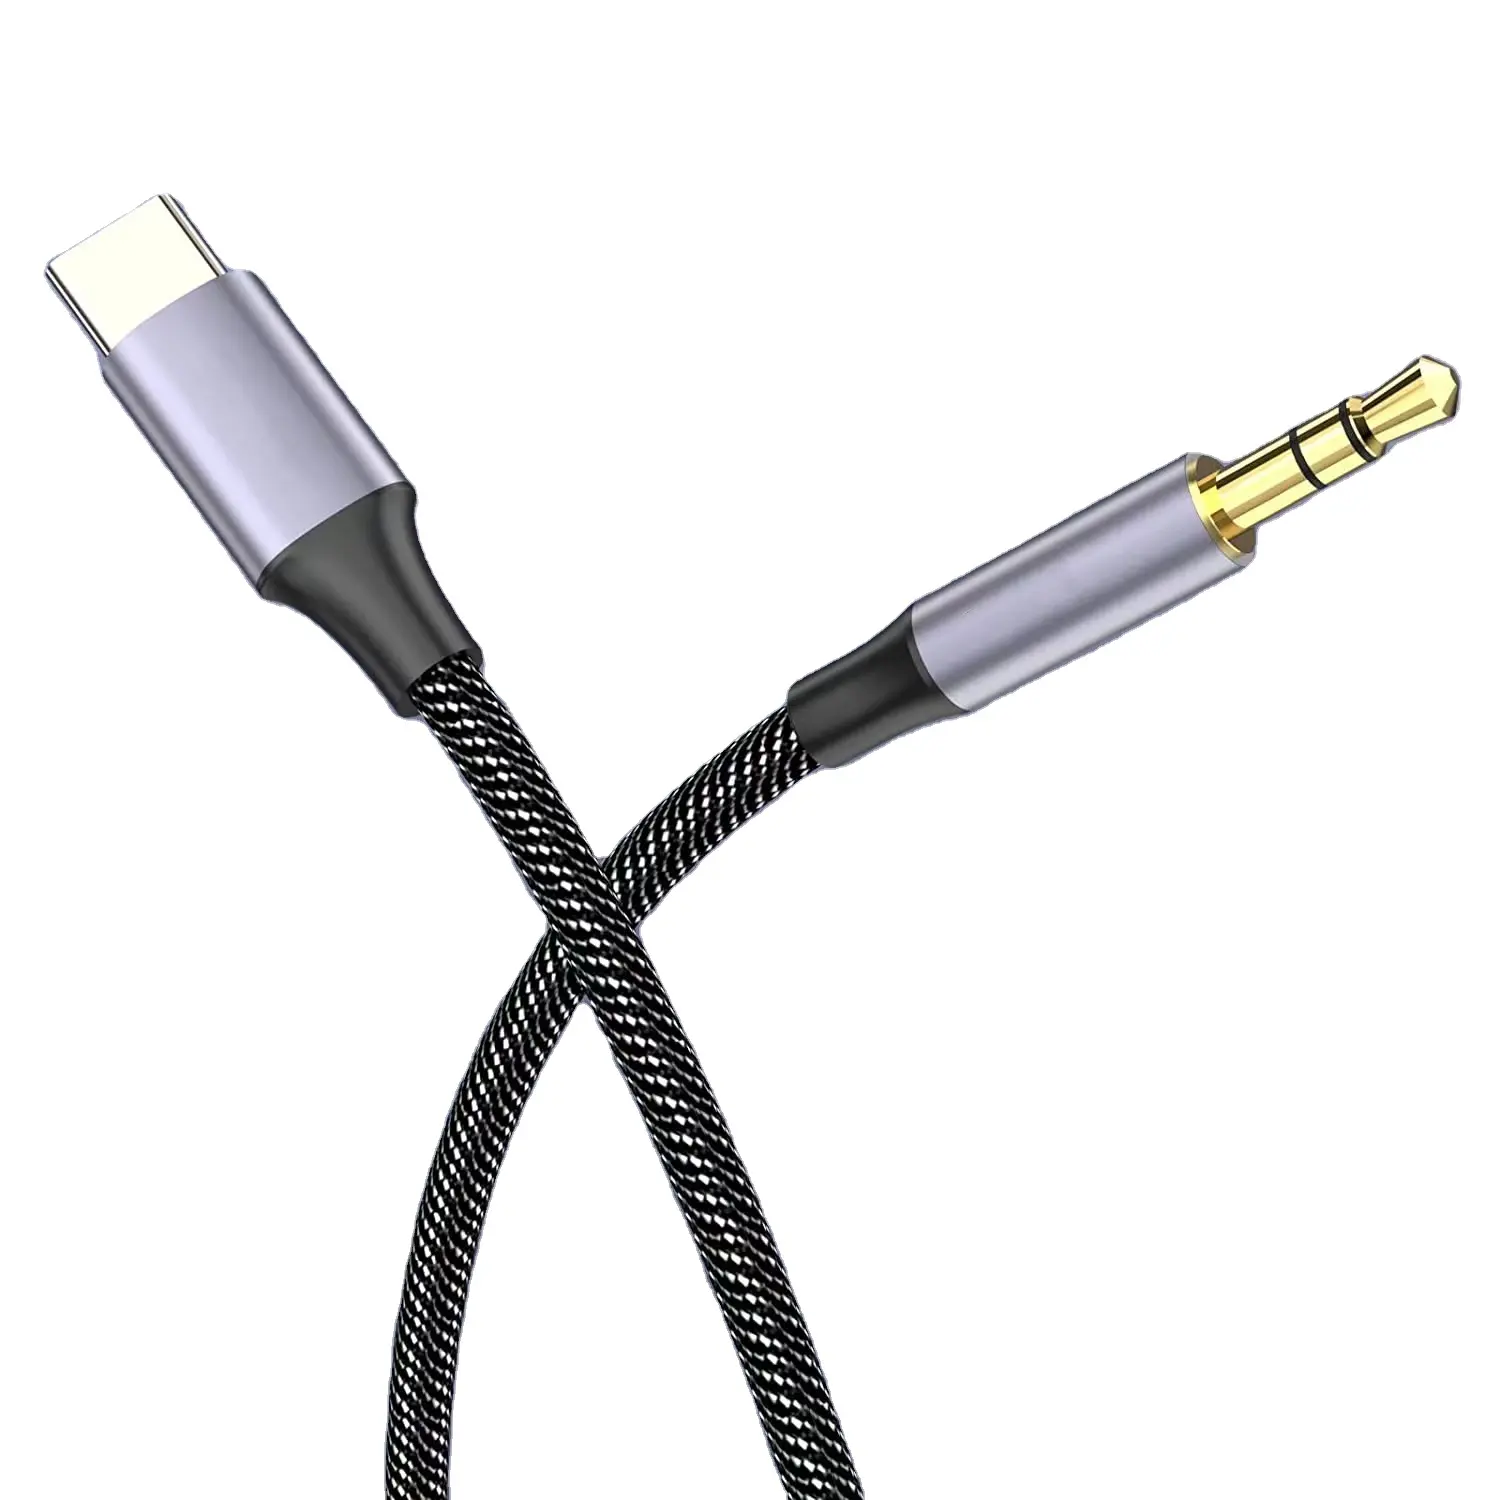 Type C to 3.5mm Audio Cable Adapter Type-C USB C to 3.5 Jack Spring Aux Cable Built-in Professional DAC Chip 16bit/96KHz